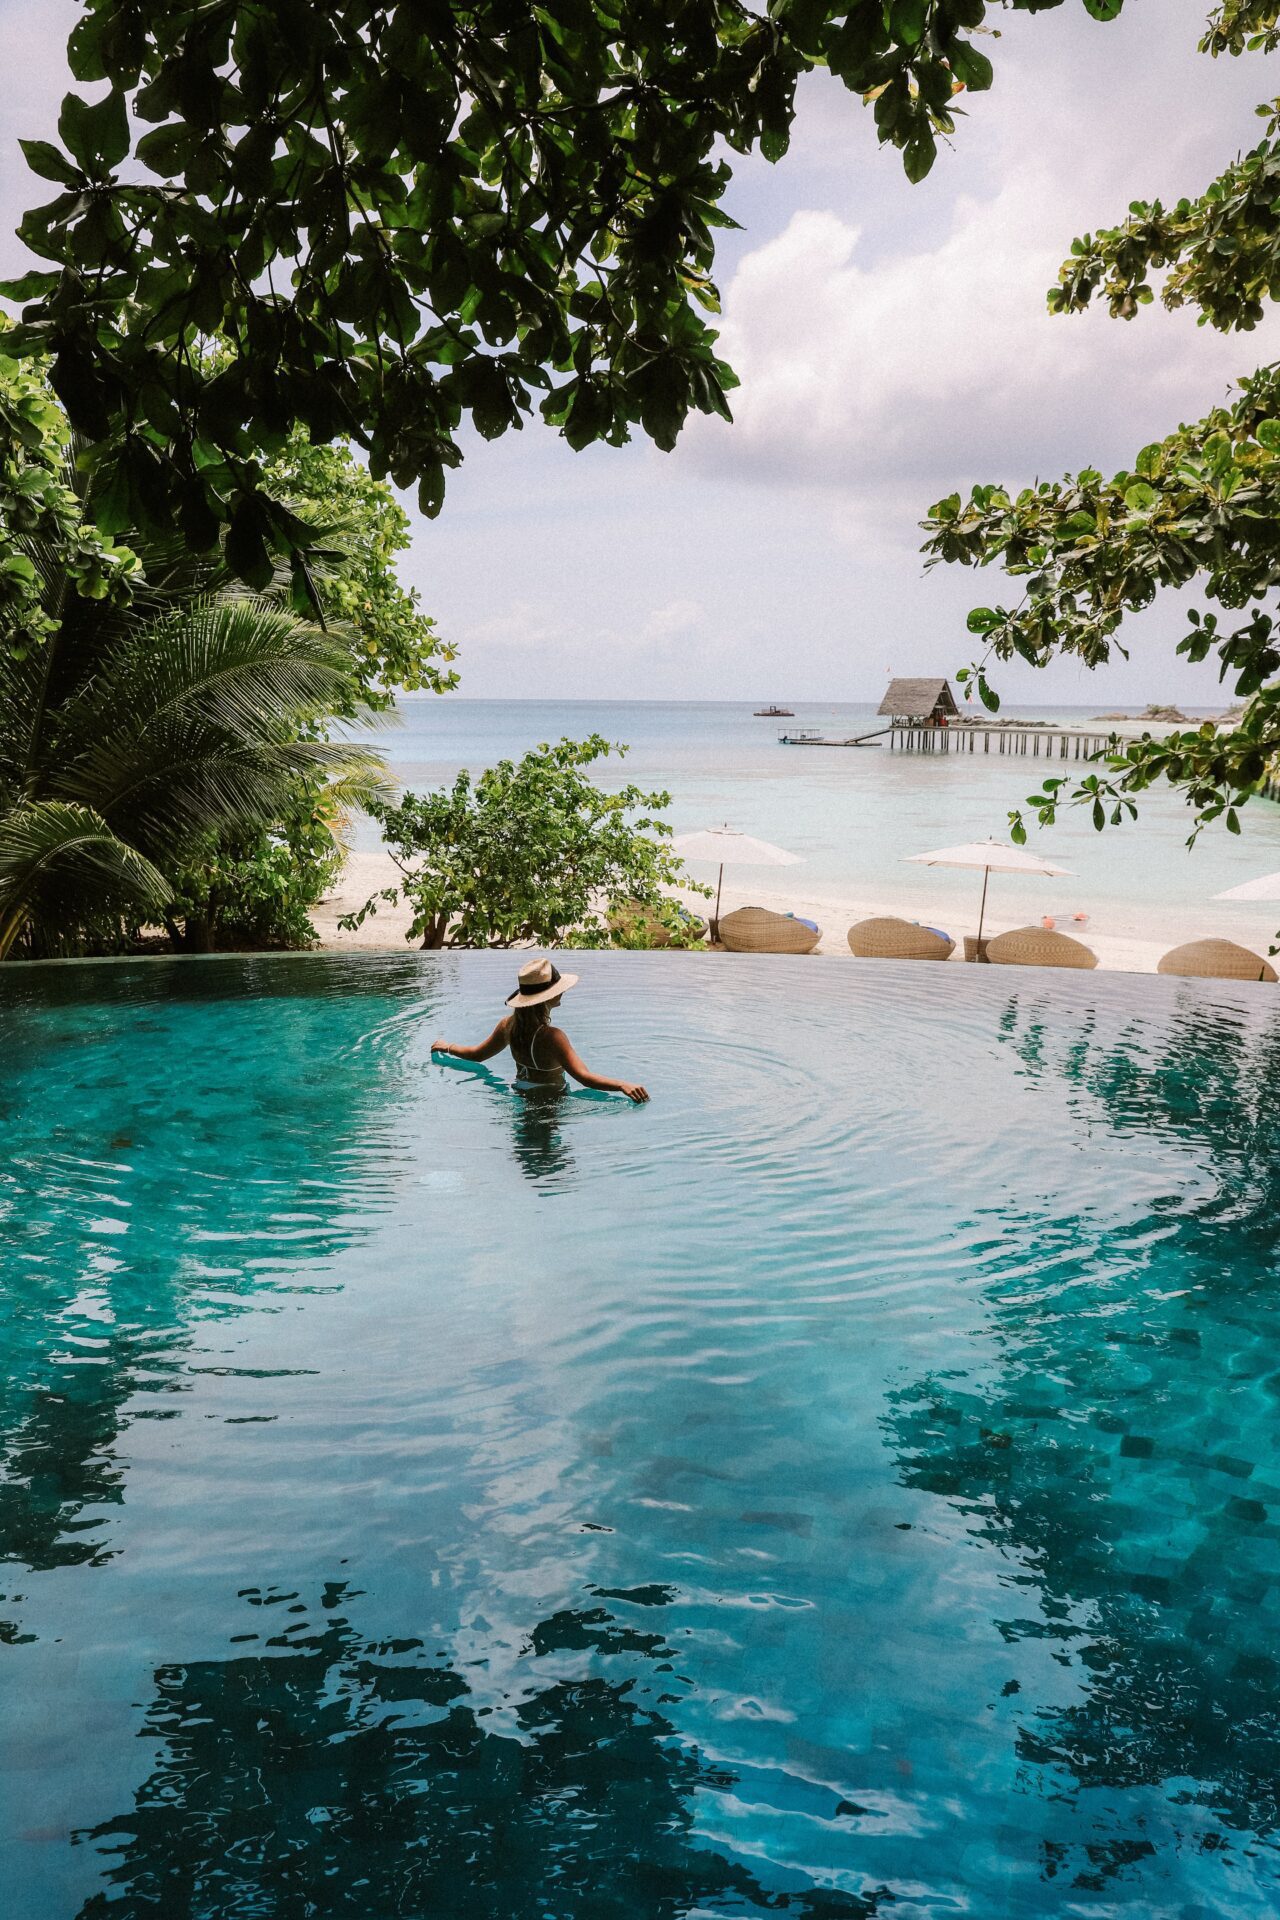 Person stands in infinity pool looking out at a tropical beach